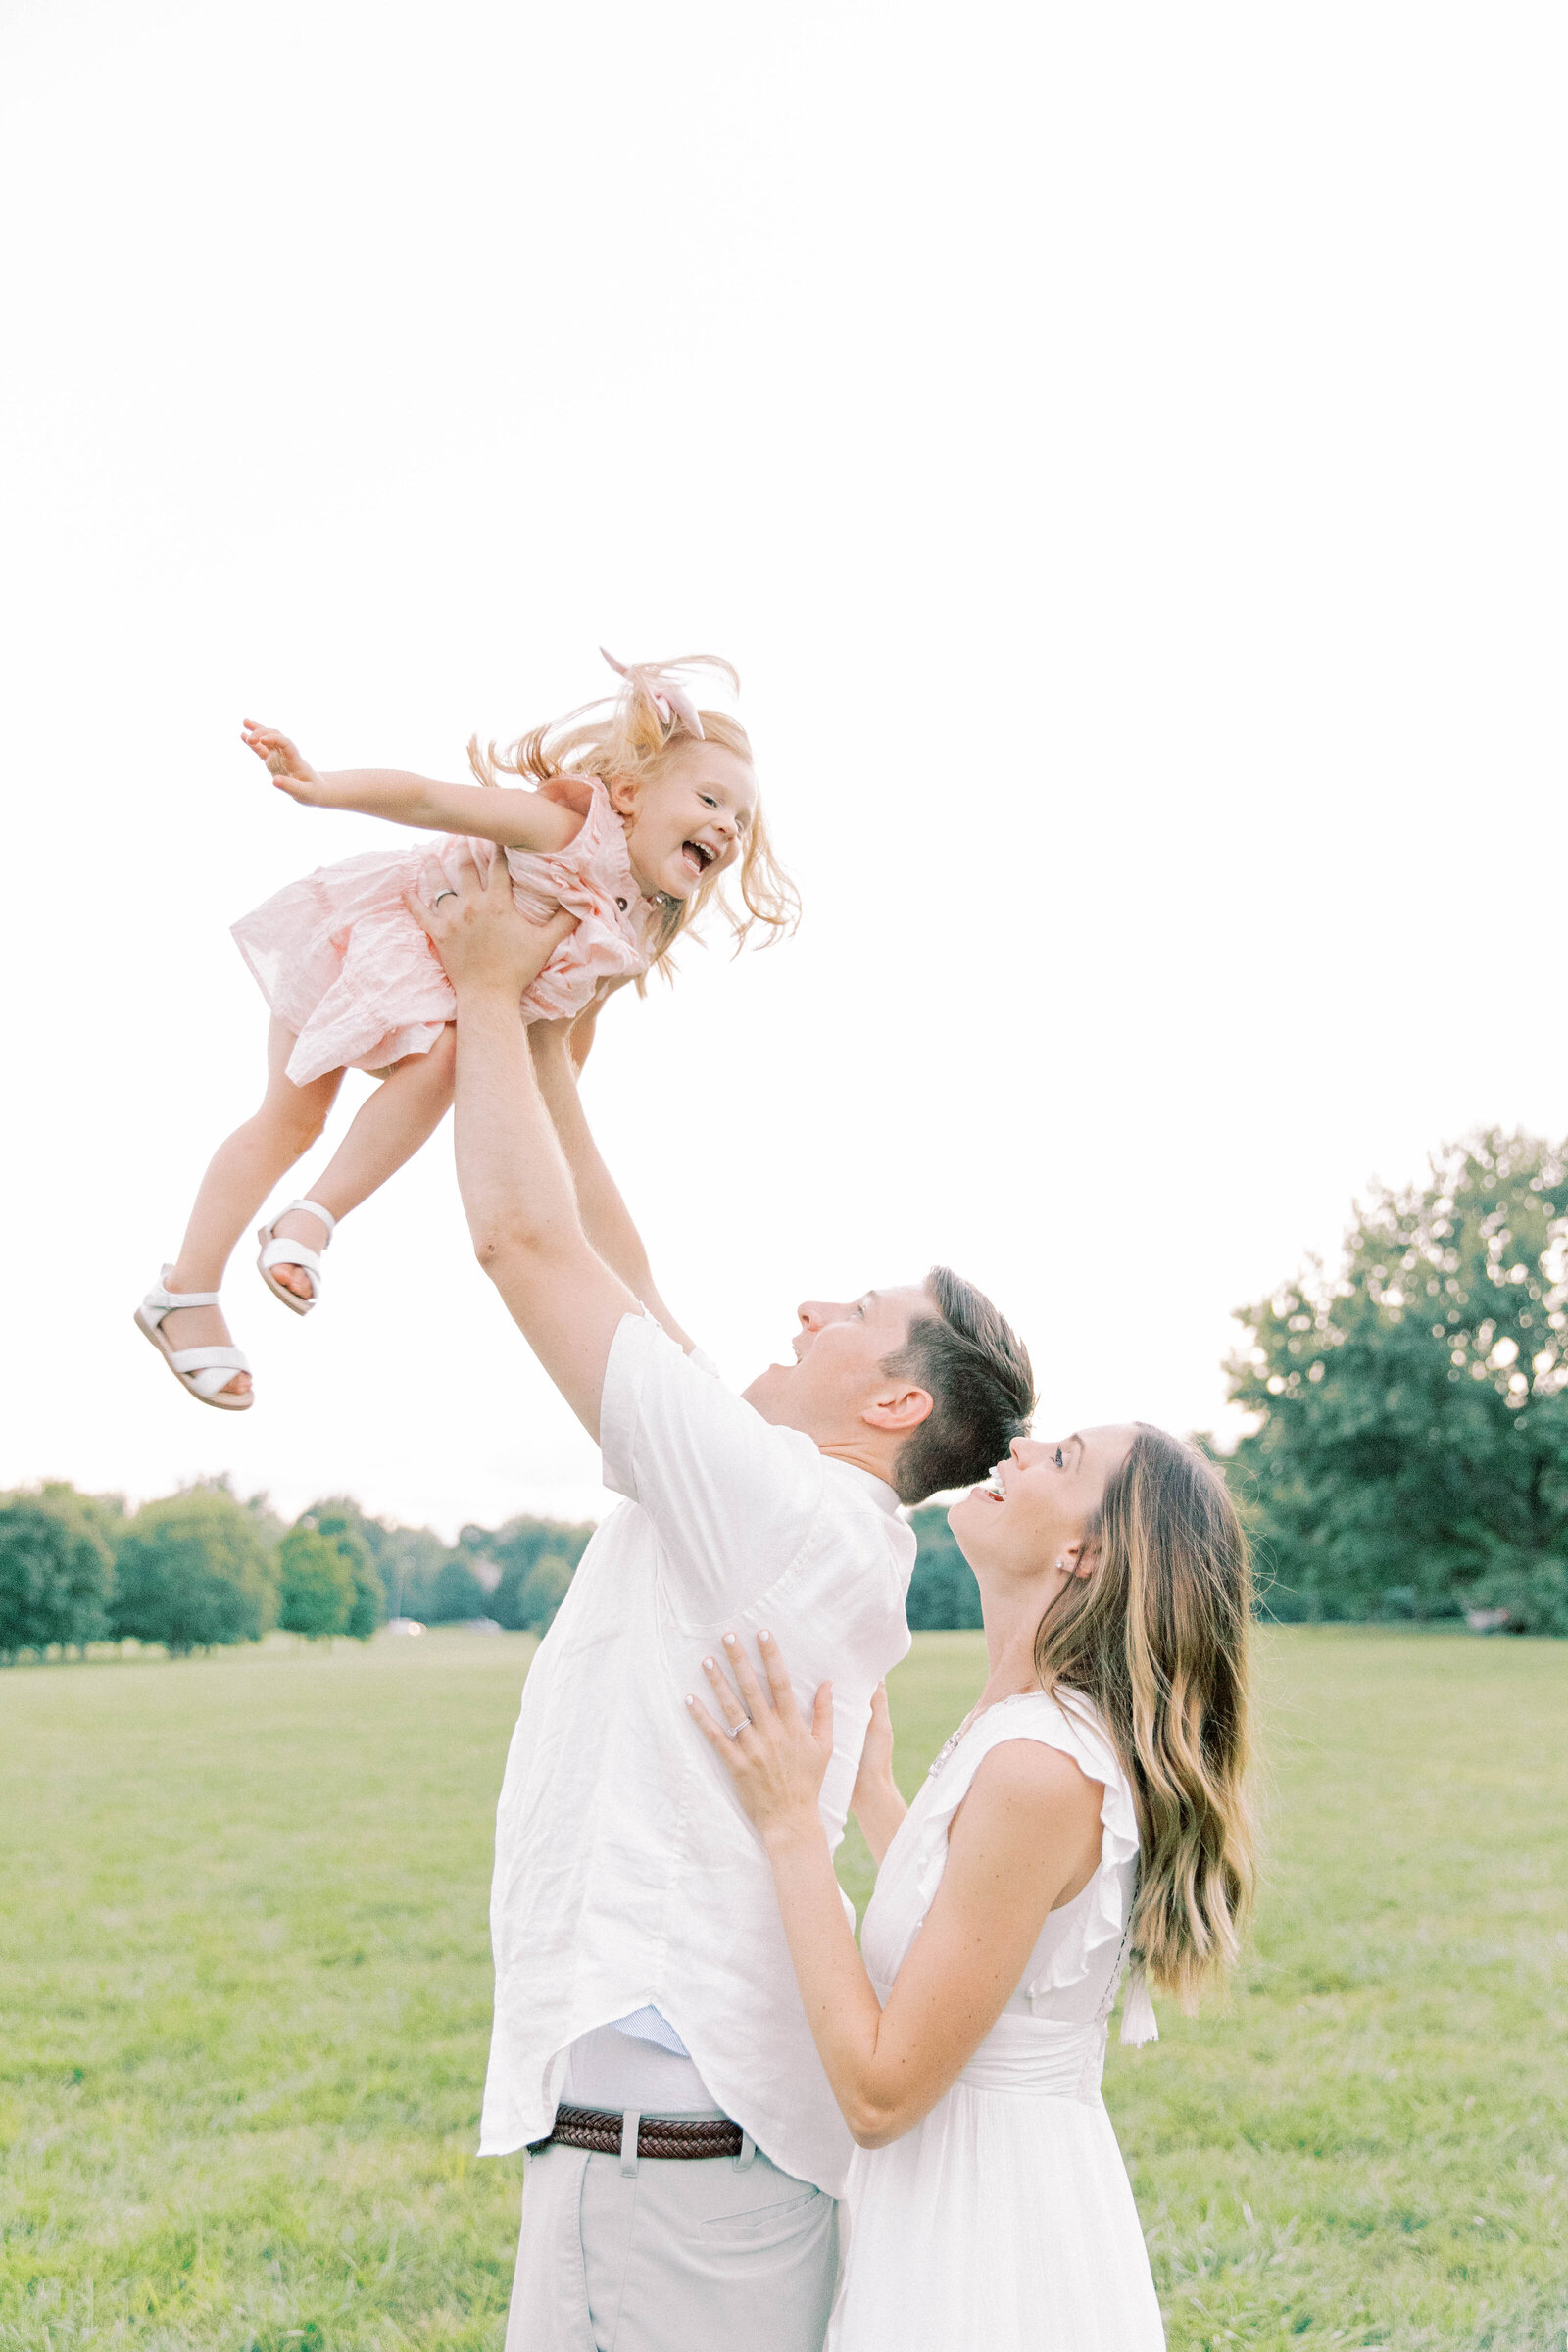 Playful family photos at Loose Park in pastels and light colors in the spring Kansas City